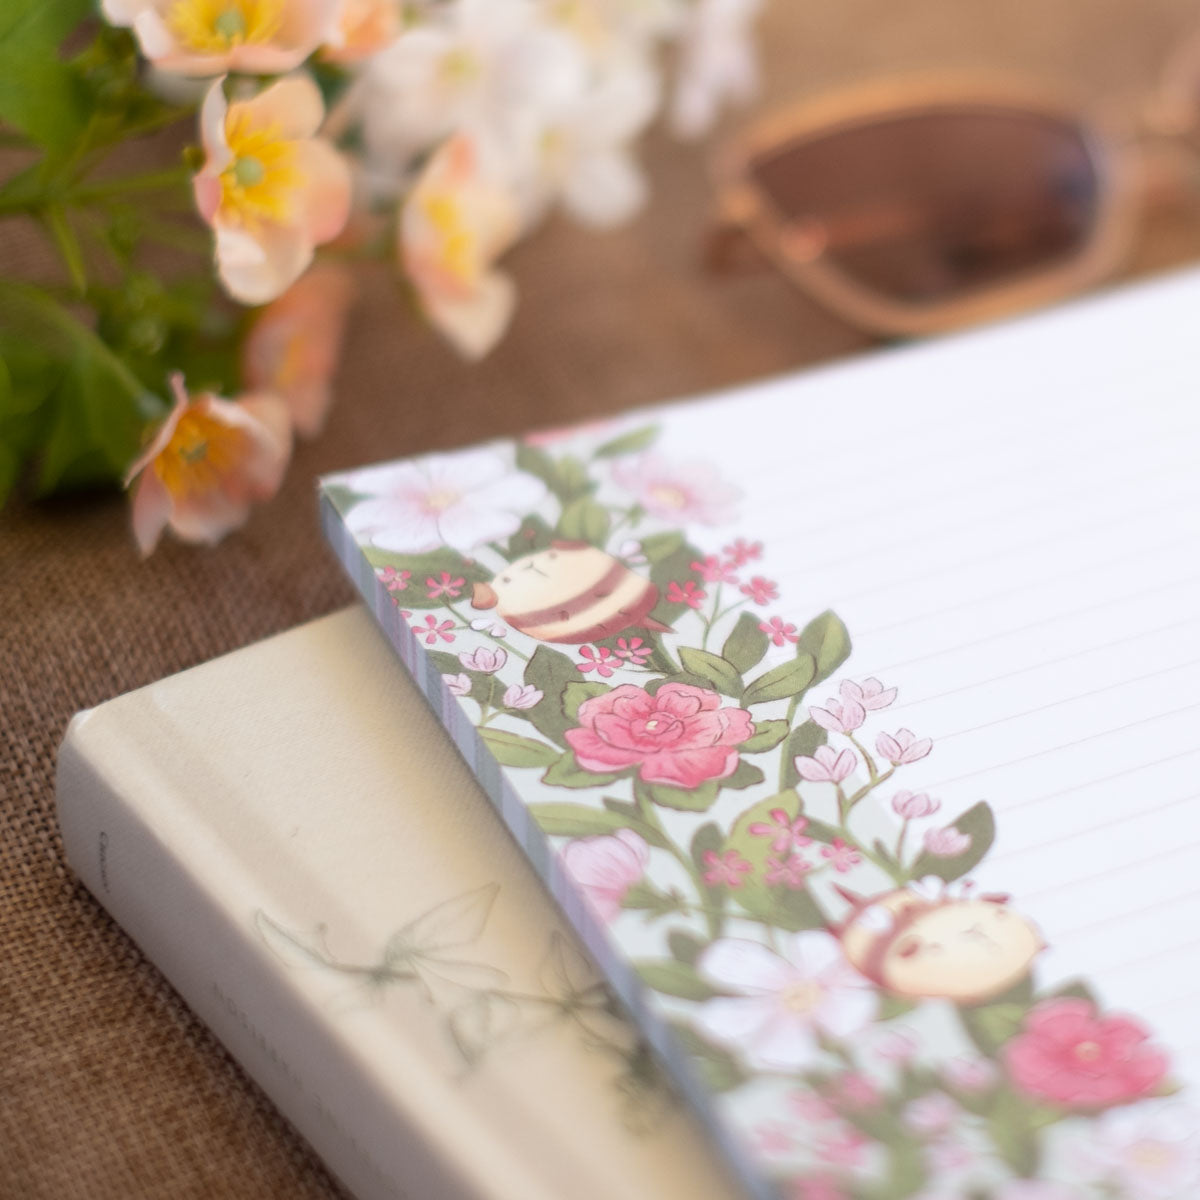 Notepad (A5)- Guinea bees and flowers